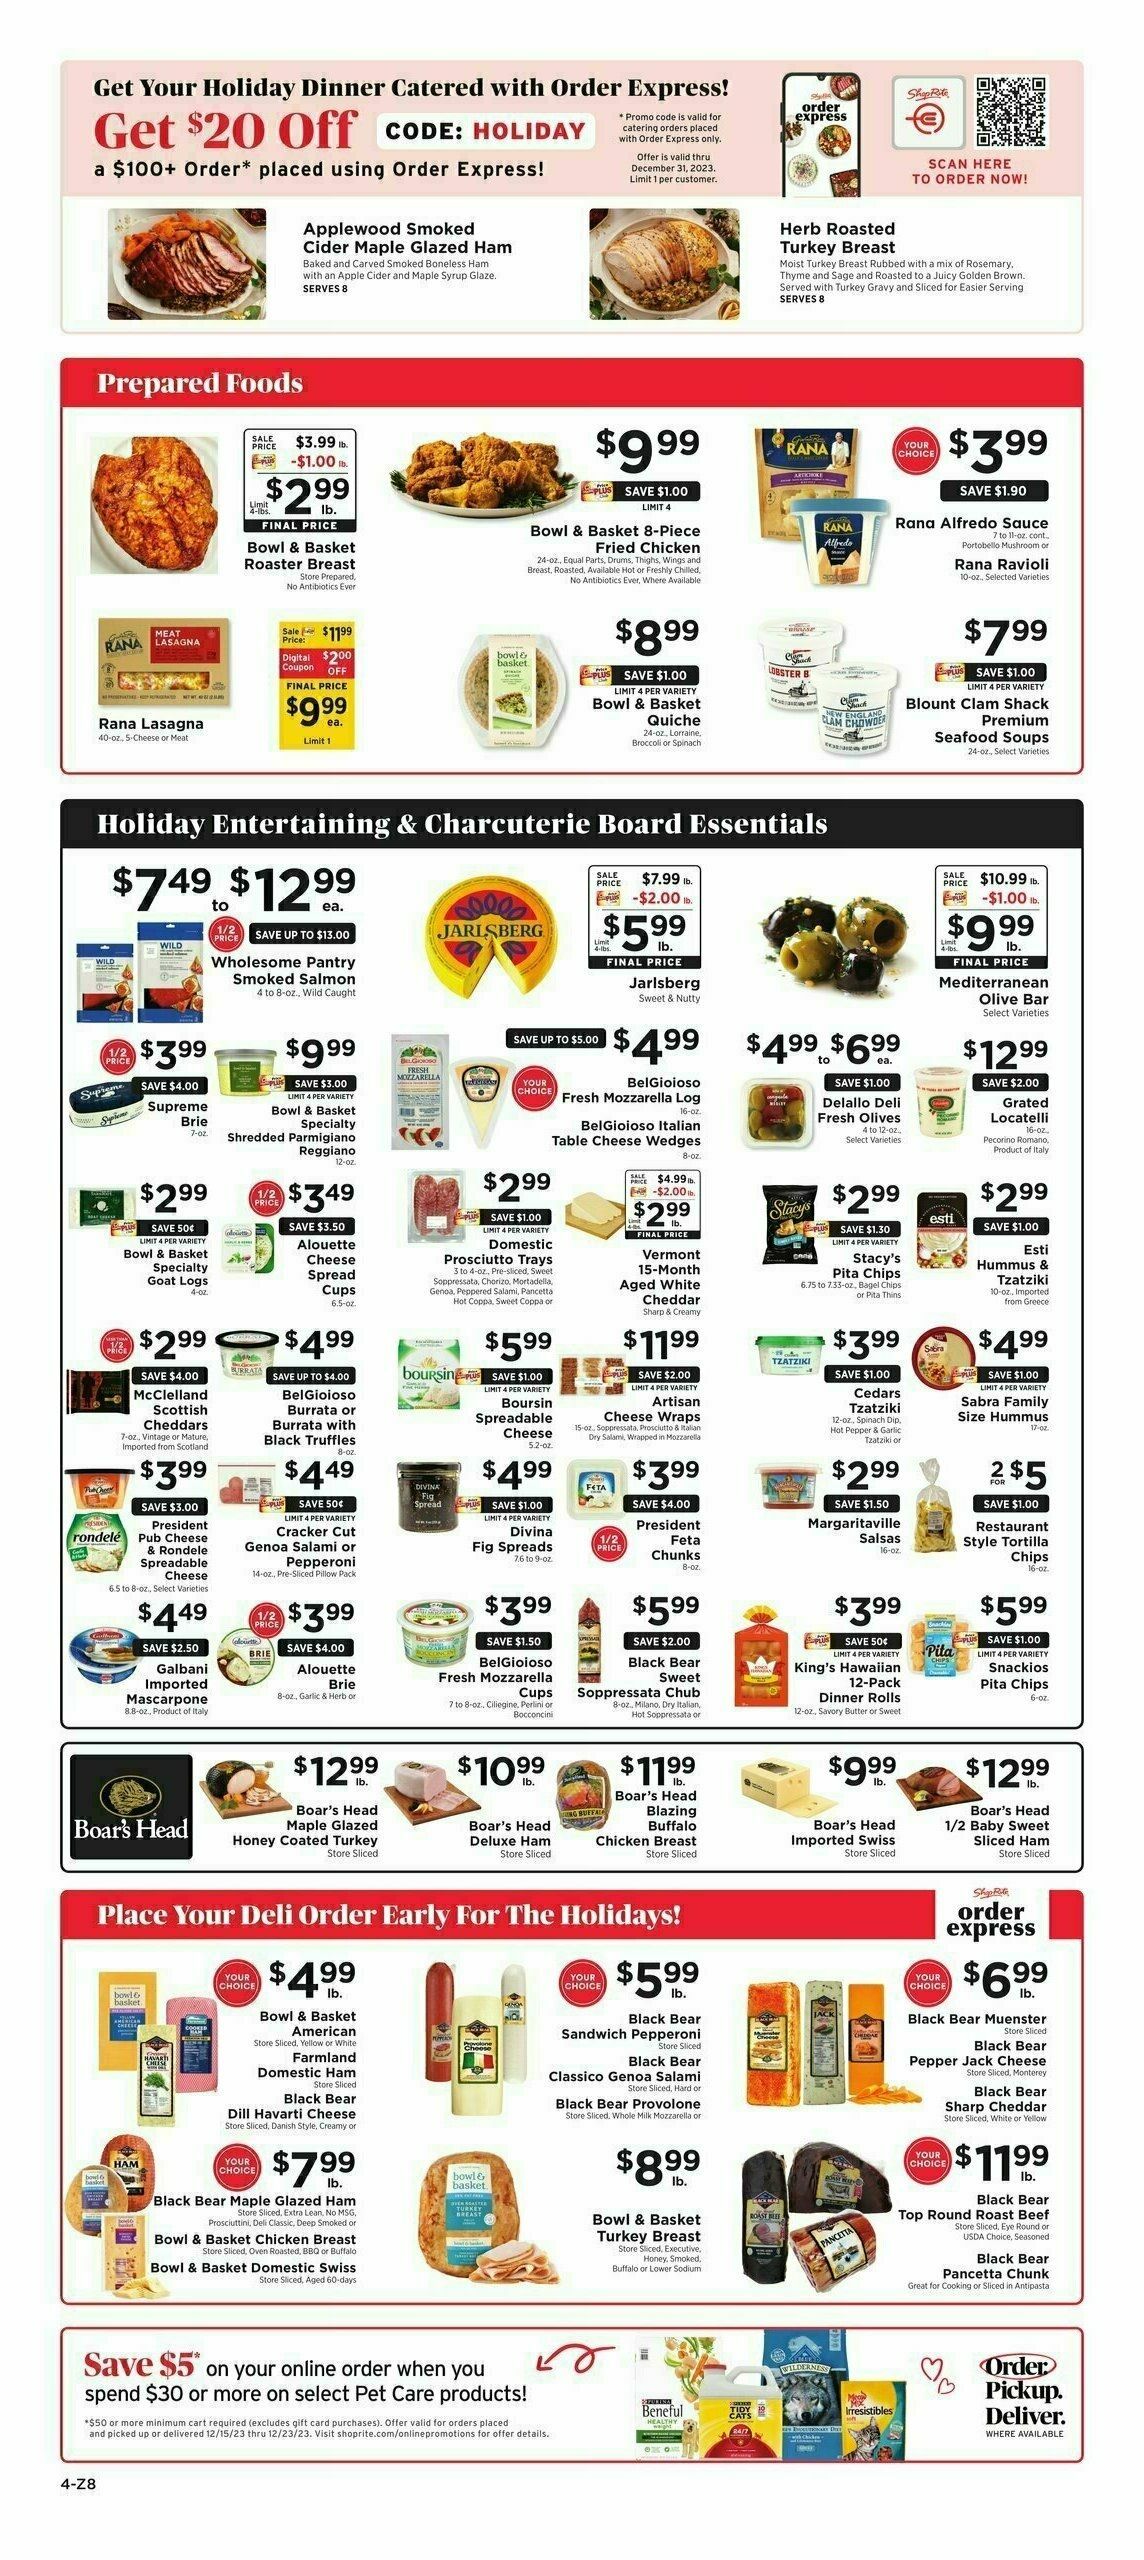 ShopRite Weekly Ad from December 15